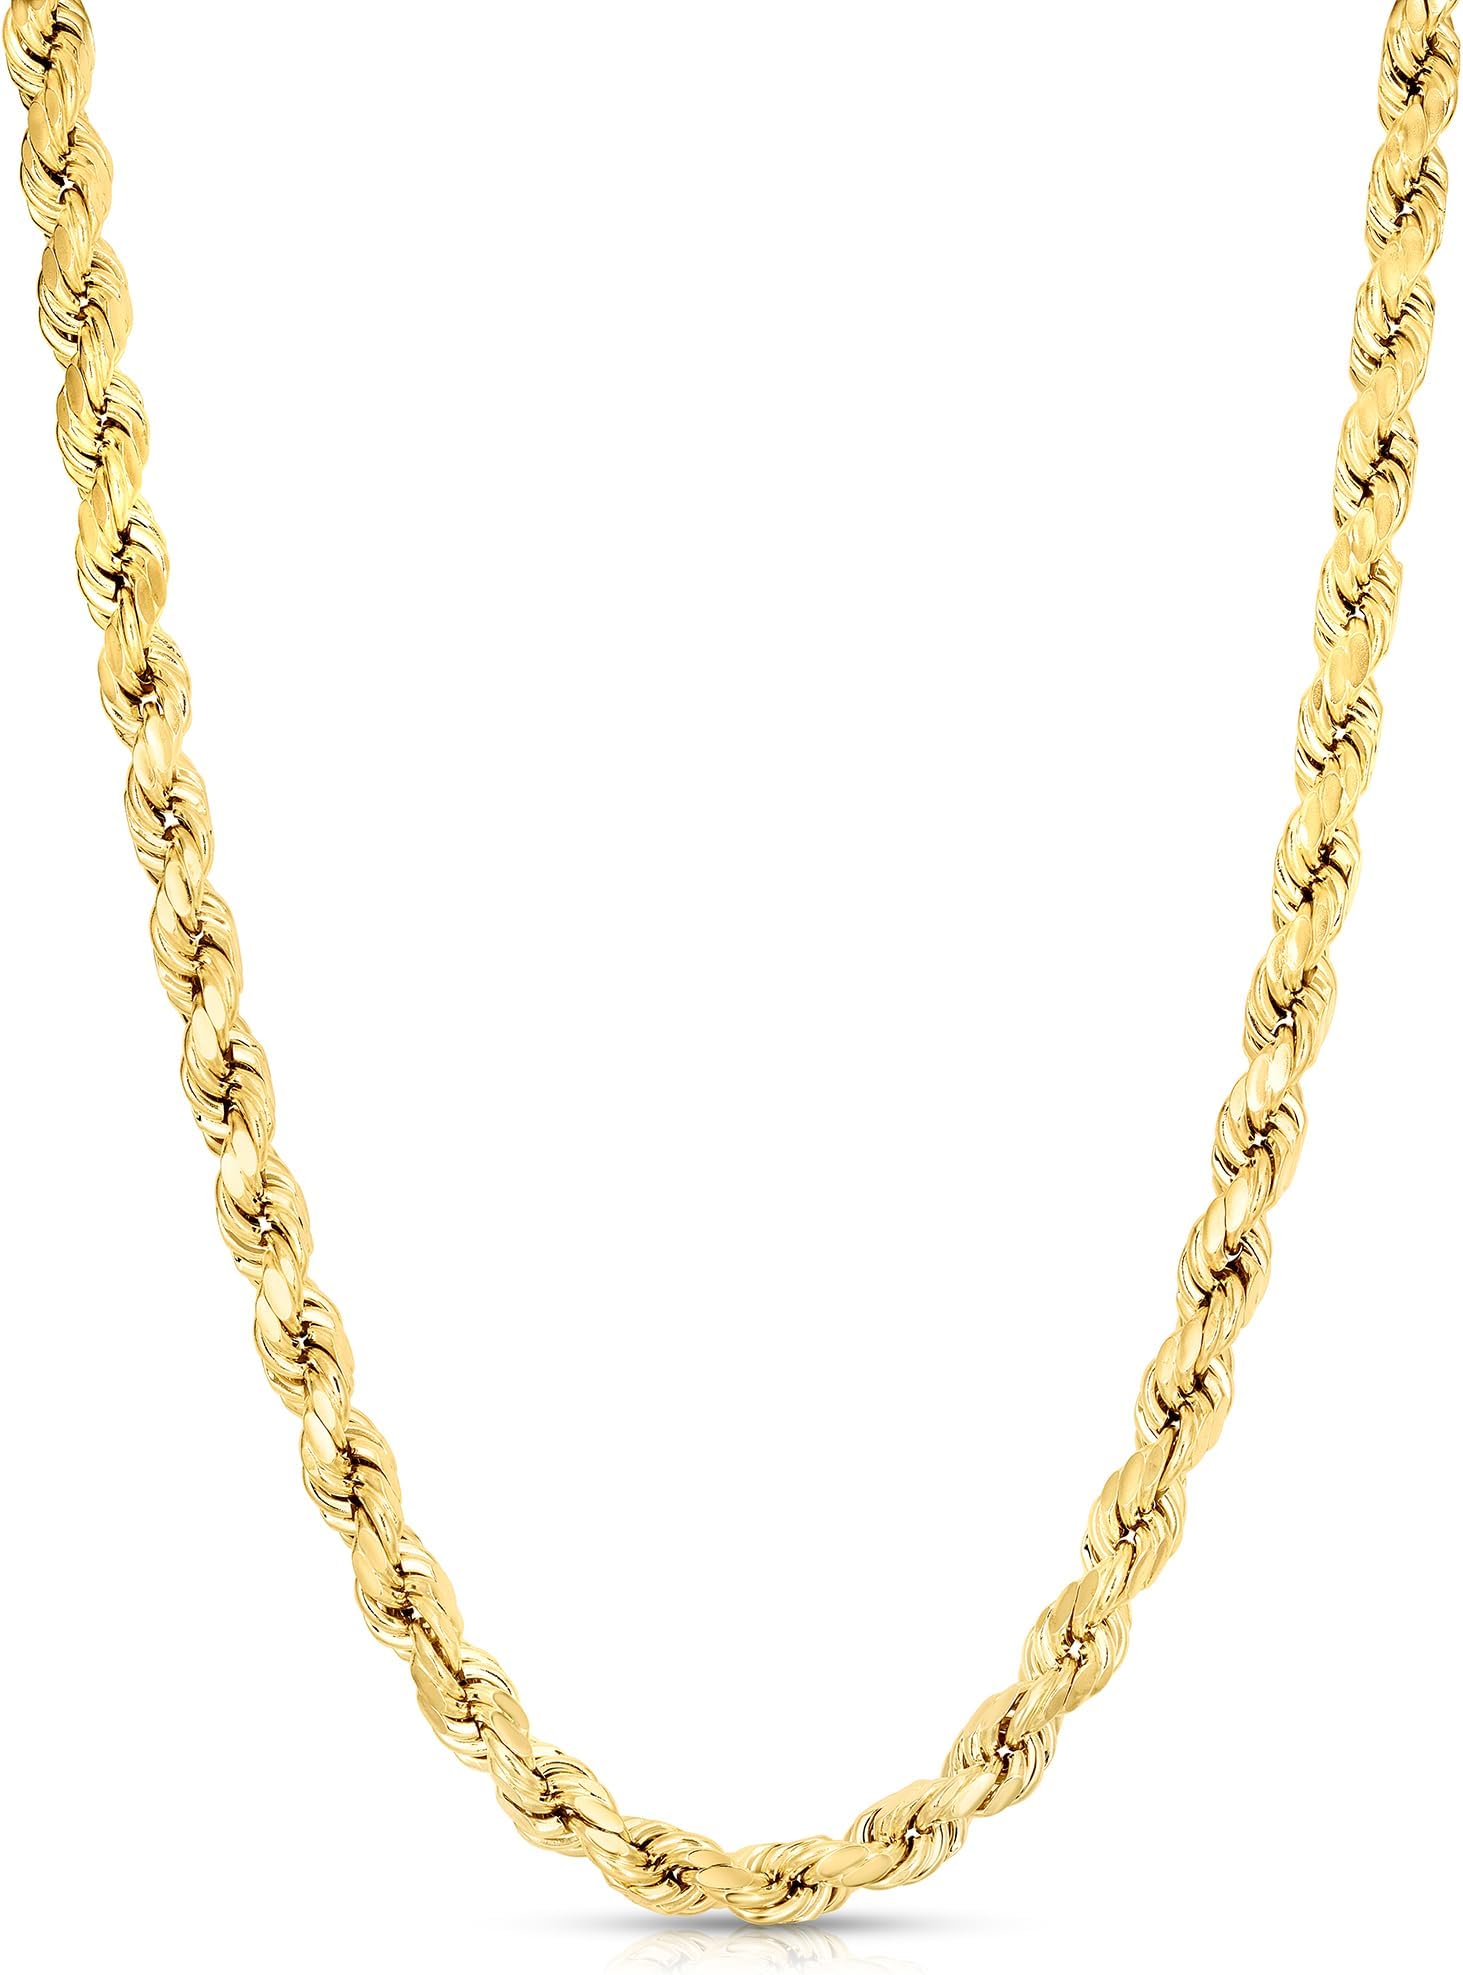 10k Yellow Gold 8mm Diamond Cut Hollow Rope Chain Necklace